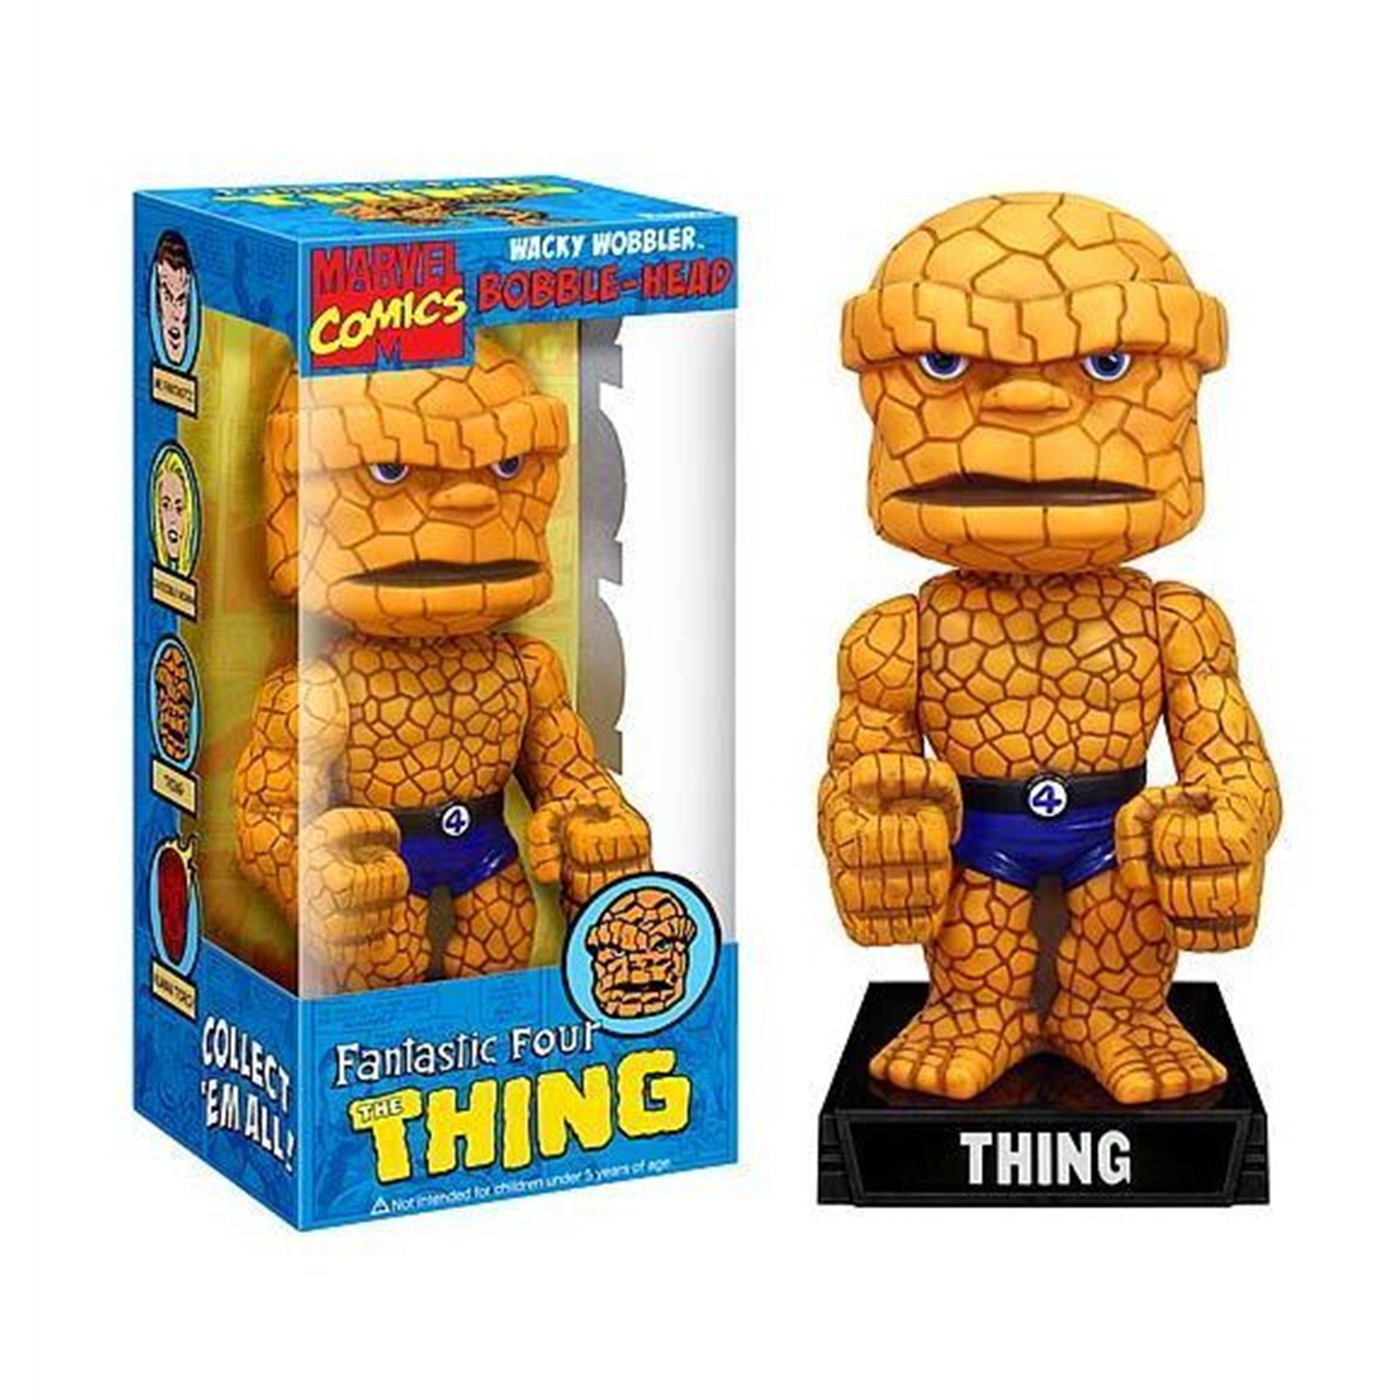 The Thing Bobblehead